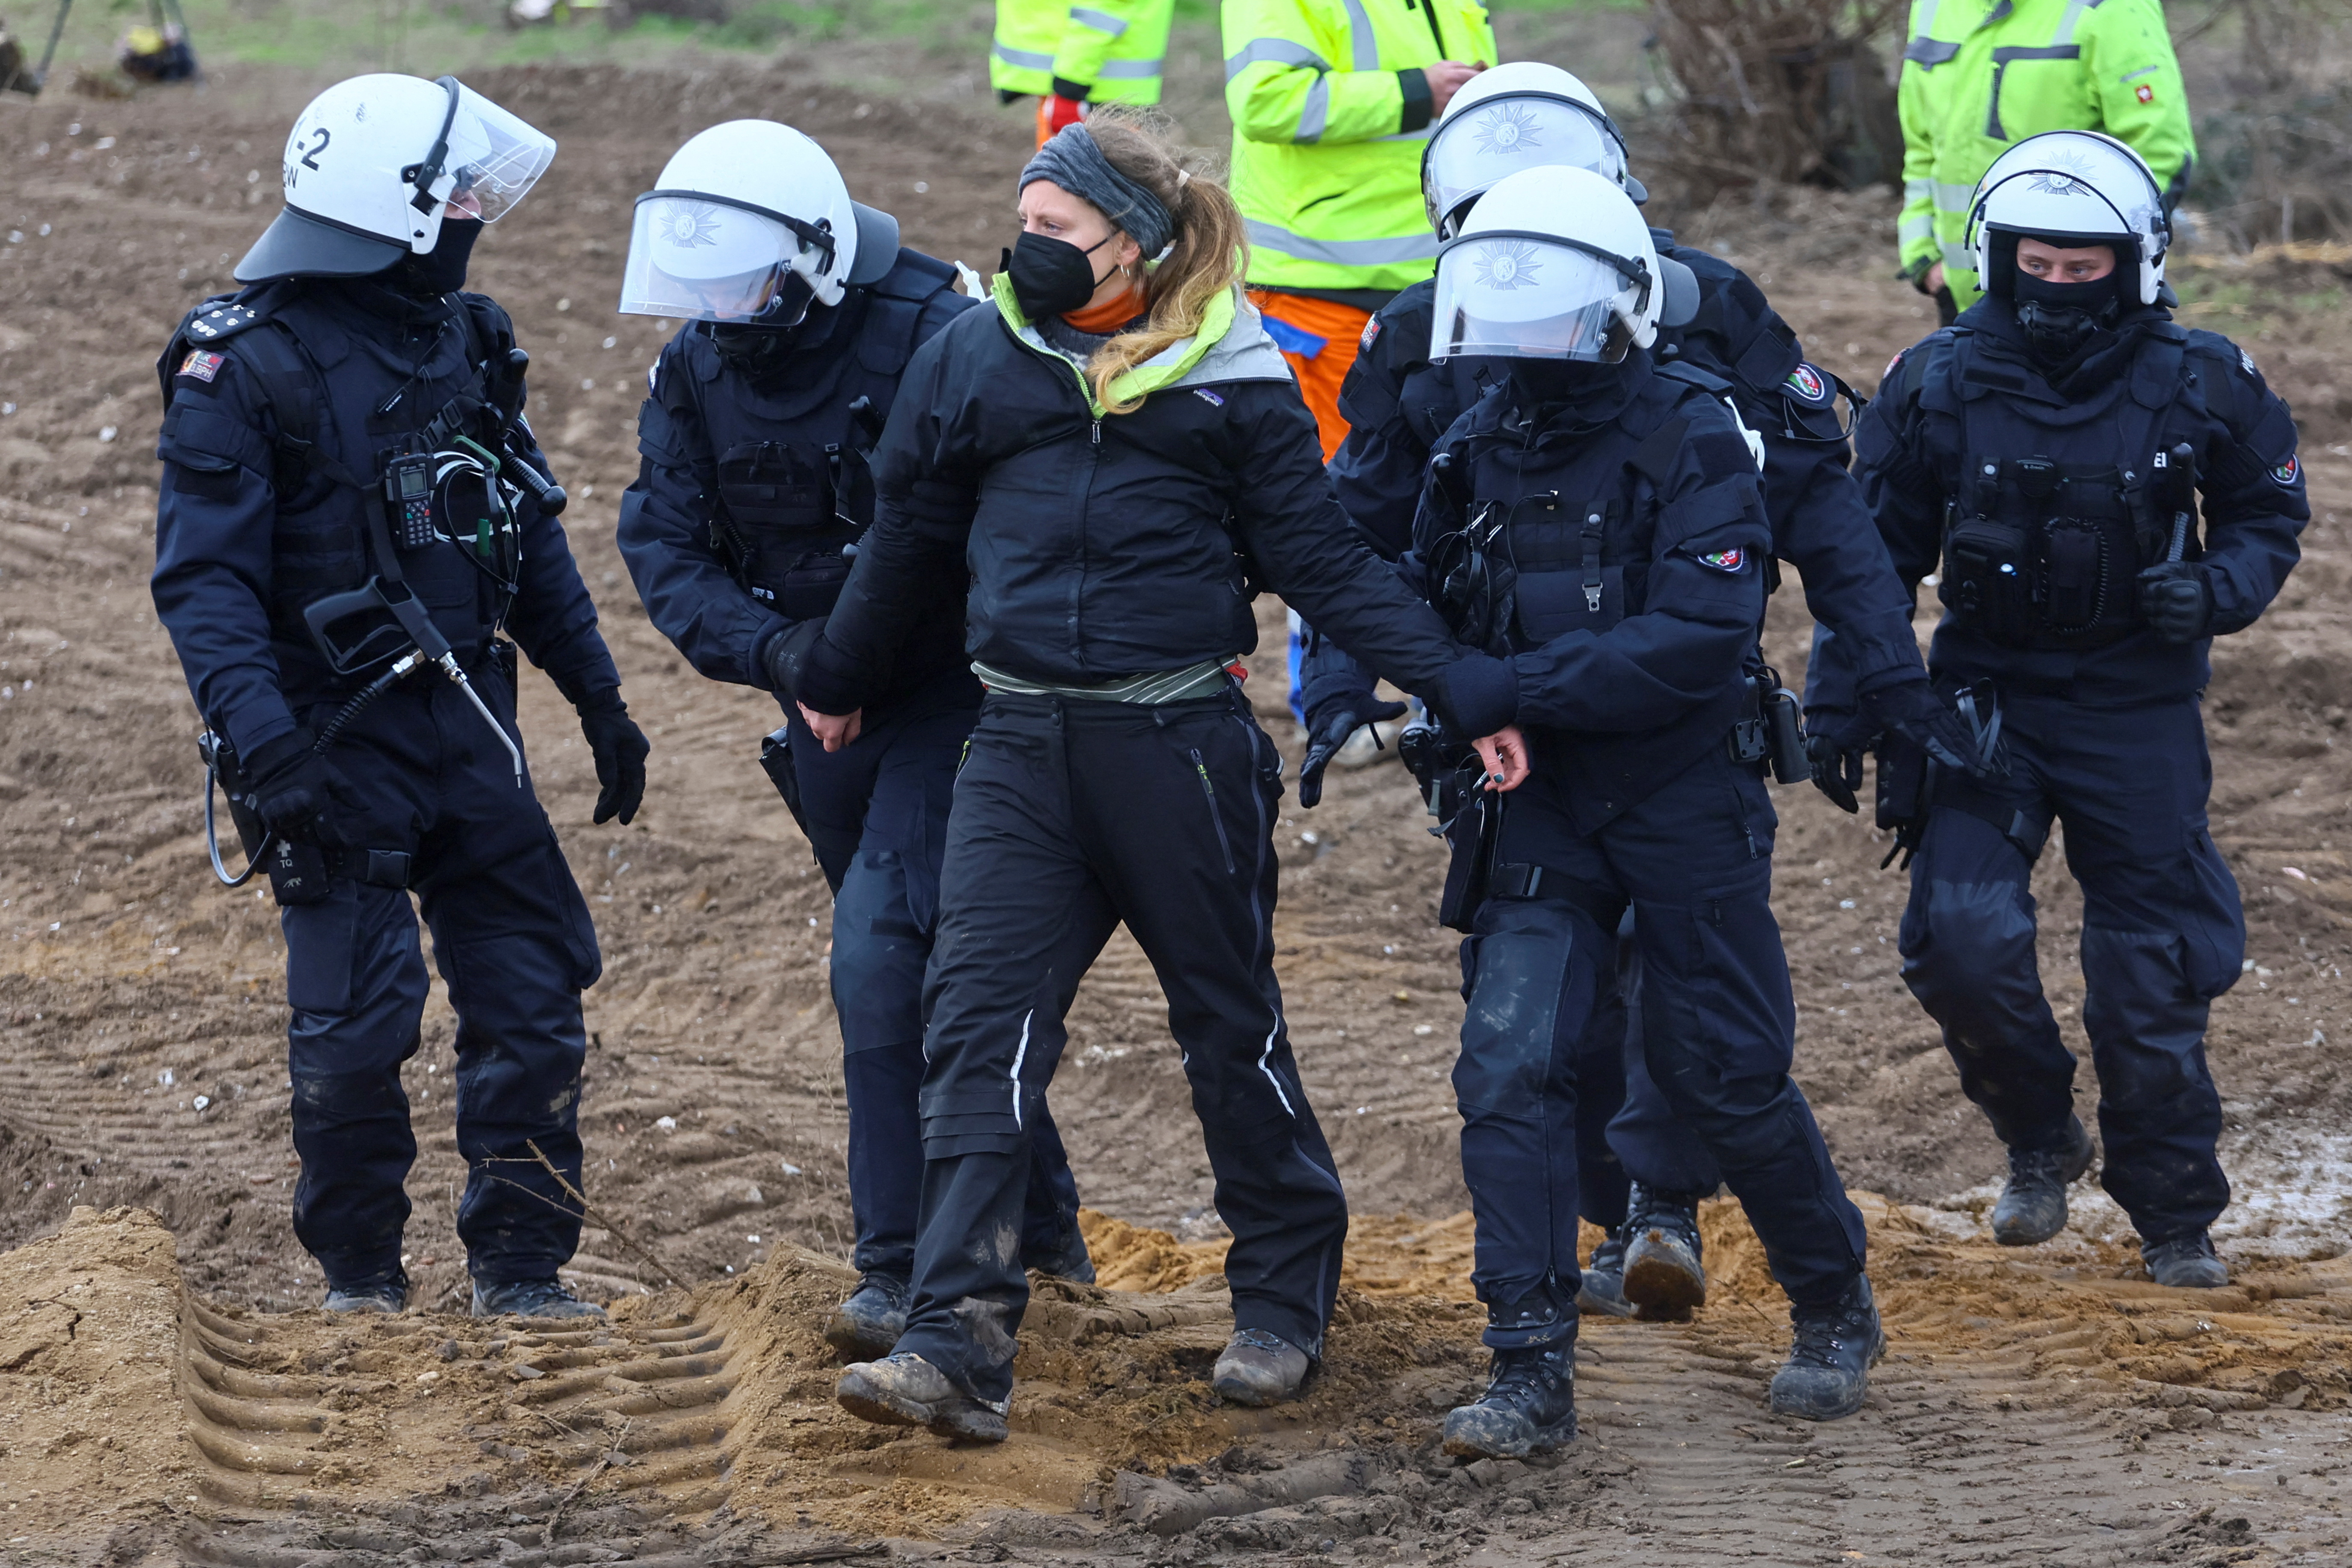 German police clash with activists in showdown over coal mine